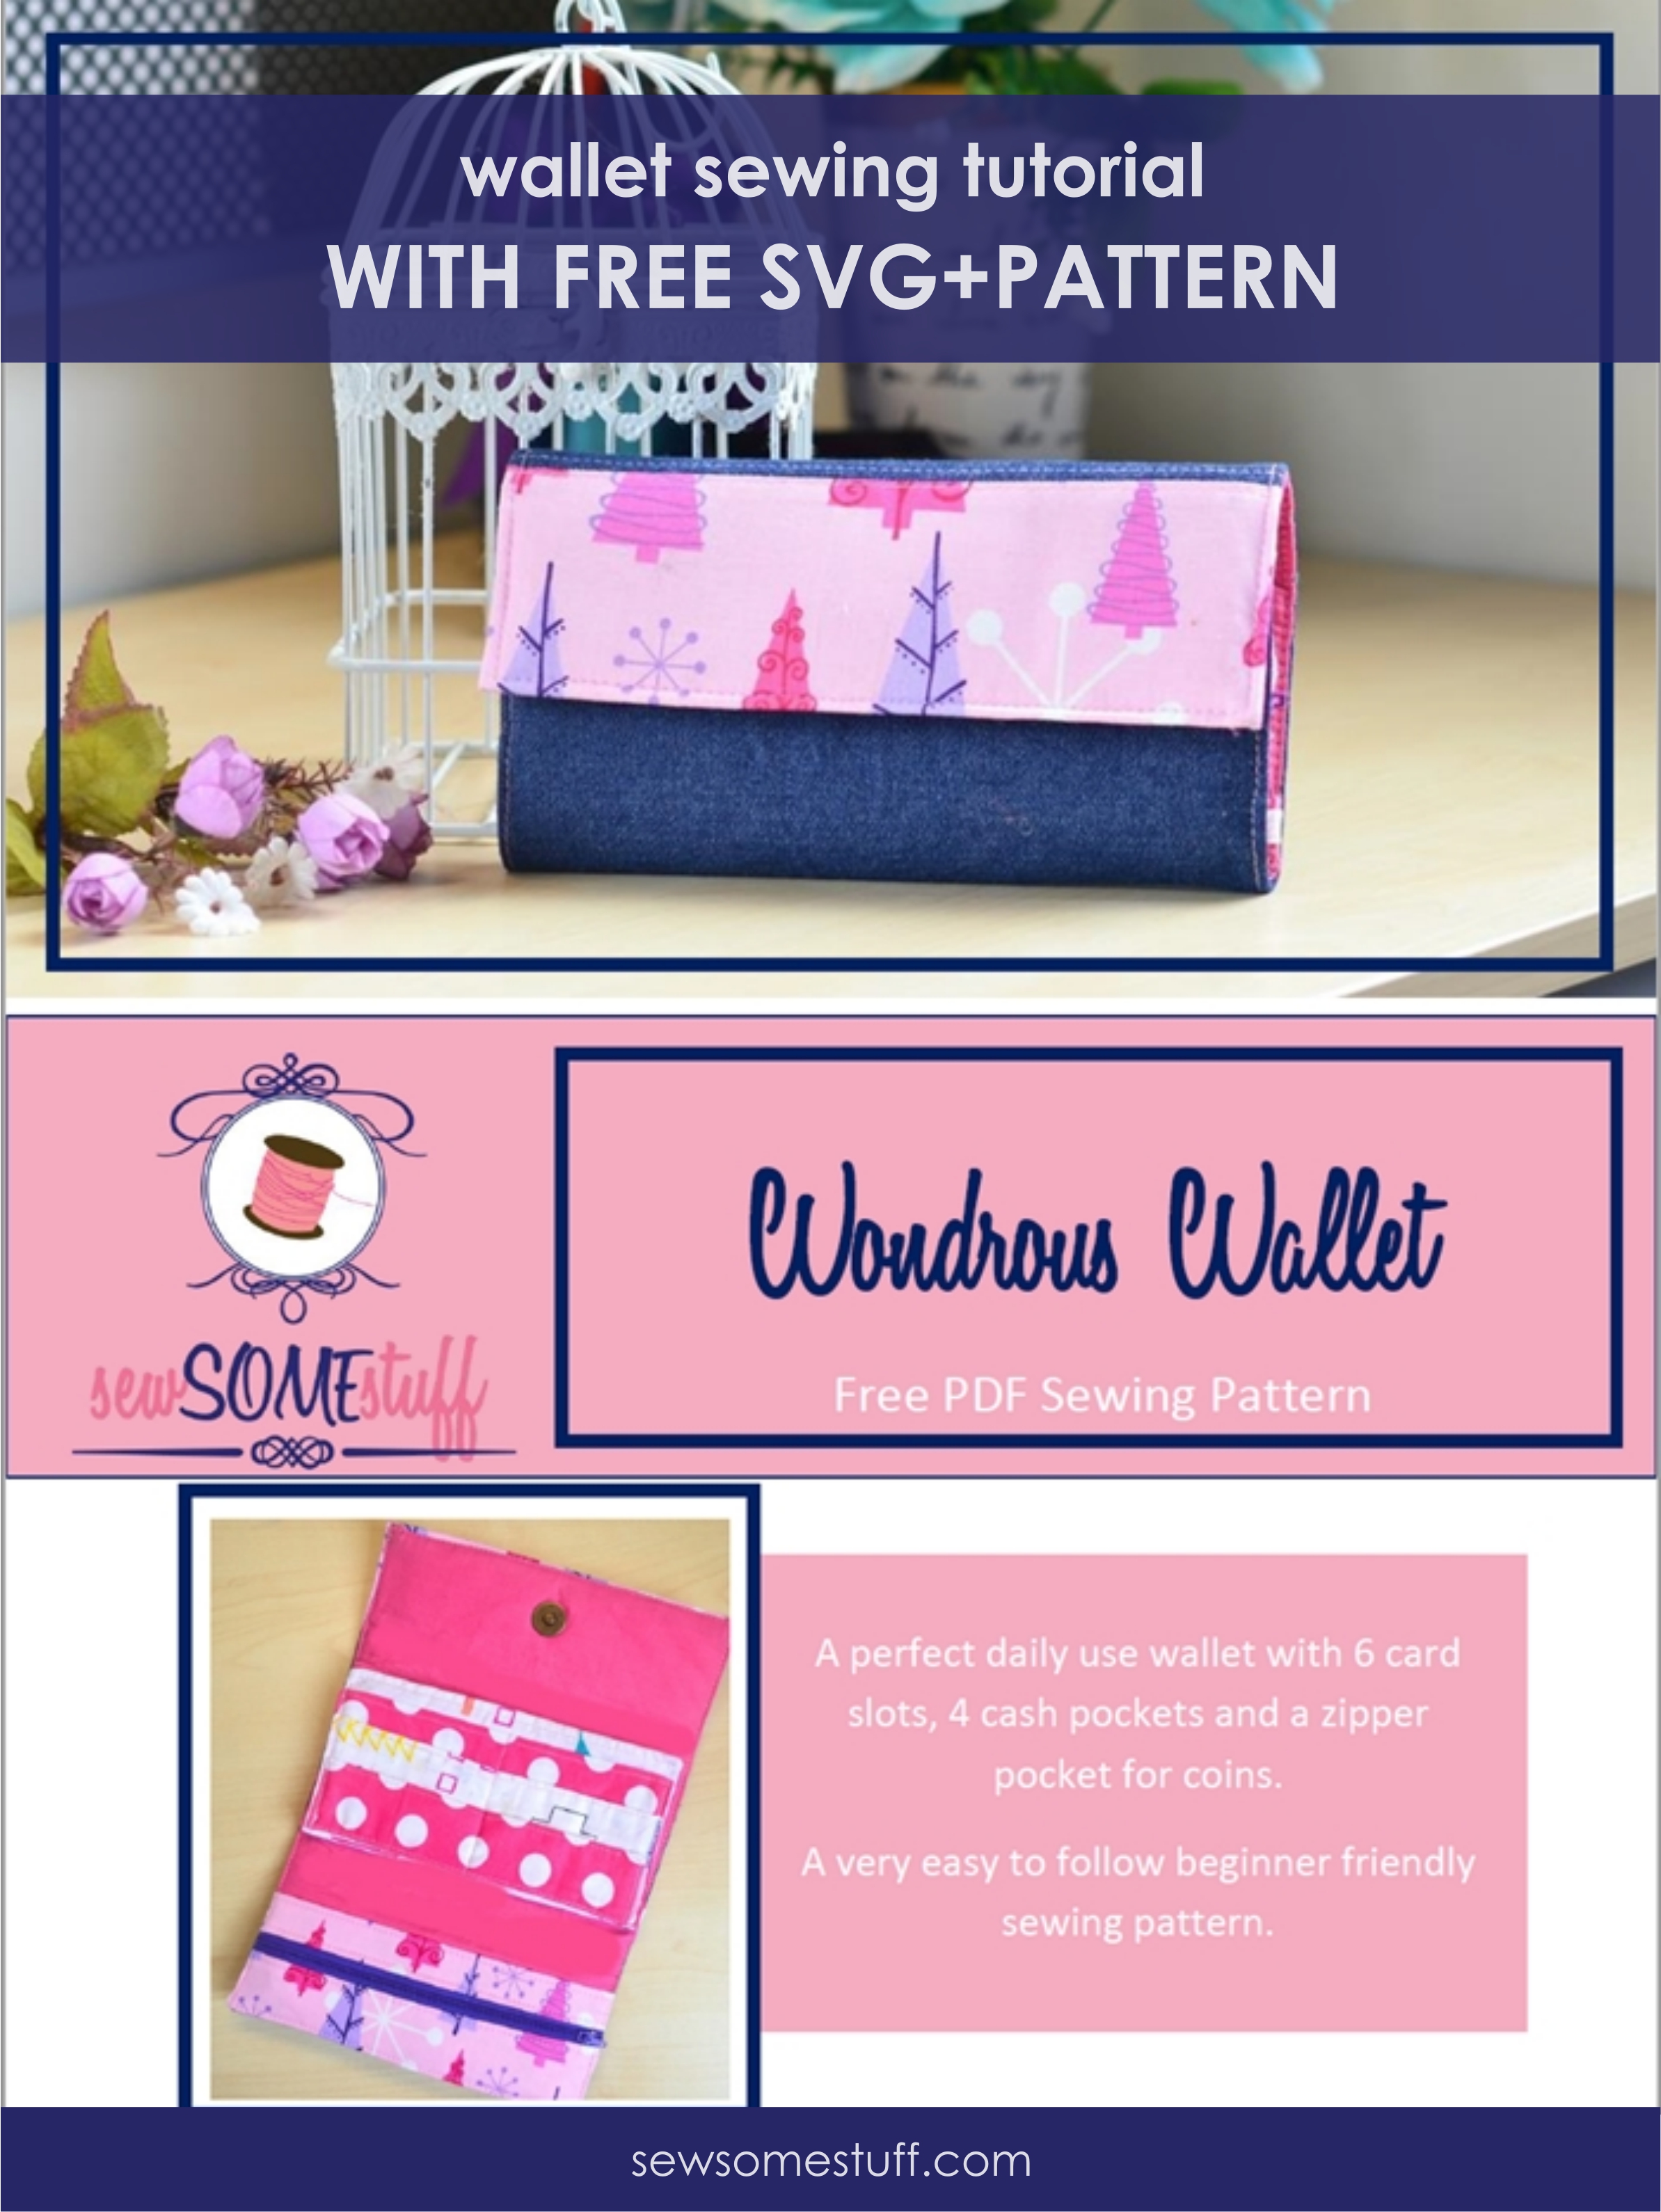 In this post, I’m sharing a free wallet pattern and a fabric handmade wallet tutorial. This DIY wallet makes a perfect gift for everyone. Learn in detail how to sew a wallet. Also, links are included for other wallet sewing patterns.